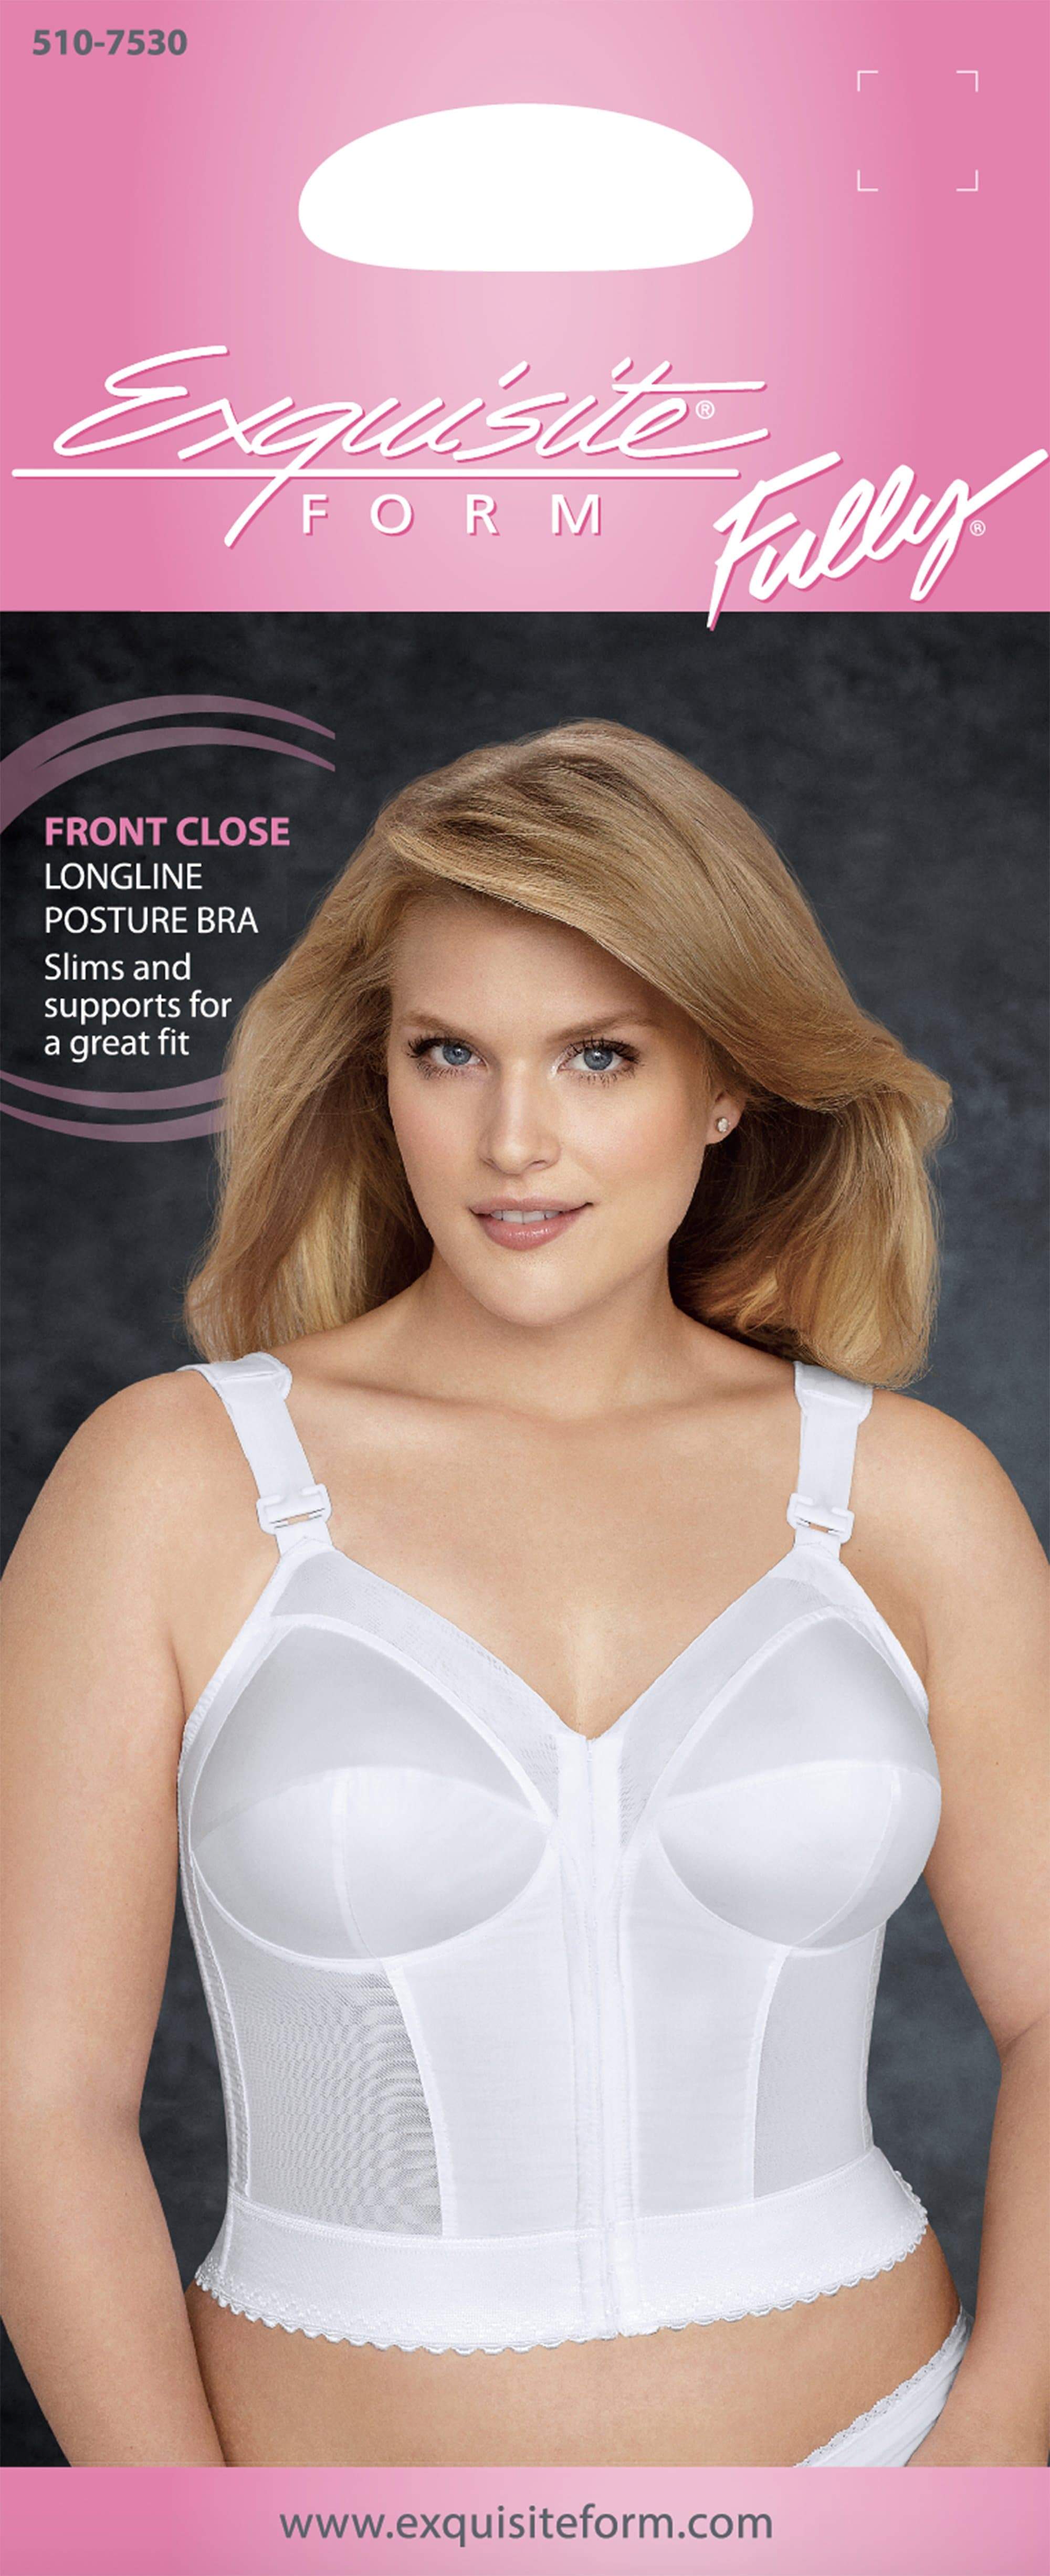 Bra Exquisite Longline Fully Front Form Posture Close White - Bras Curvy -